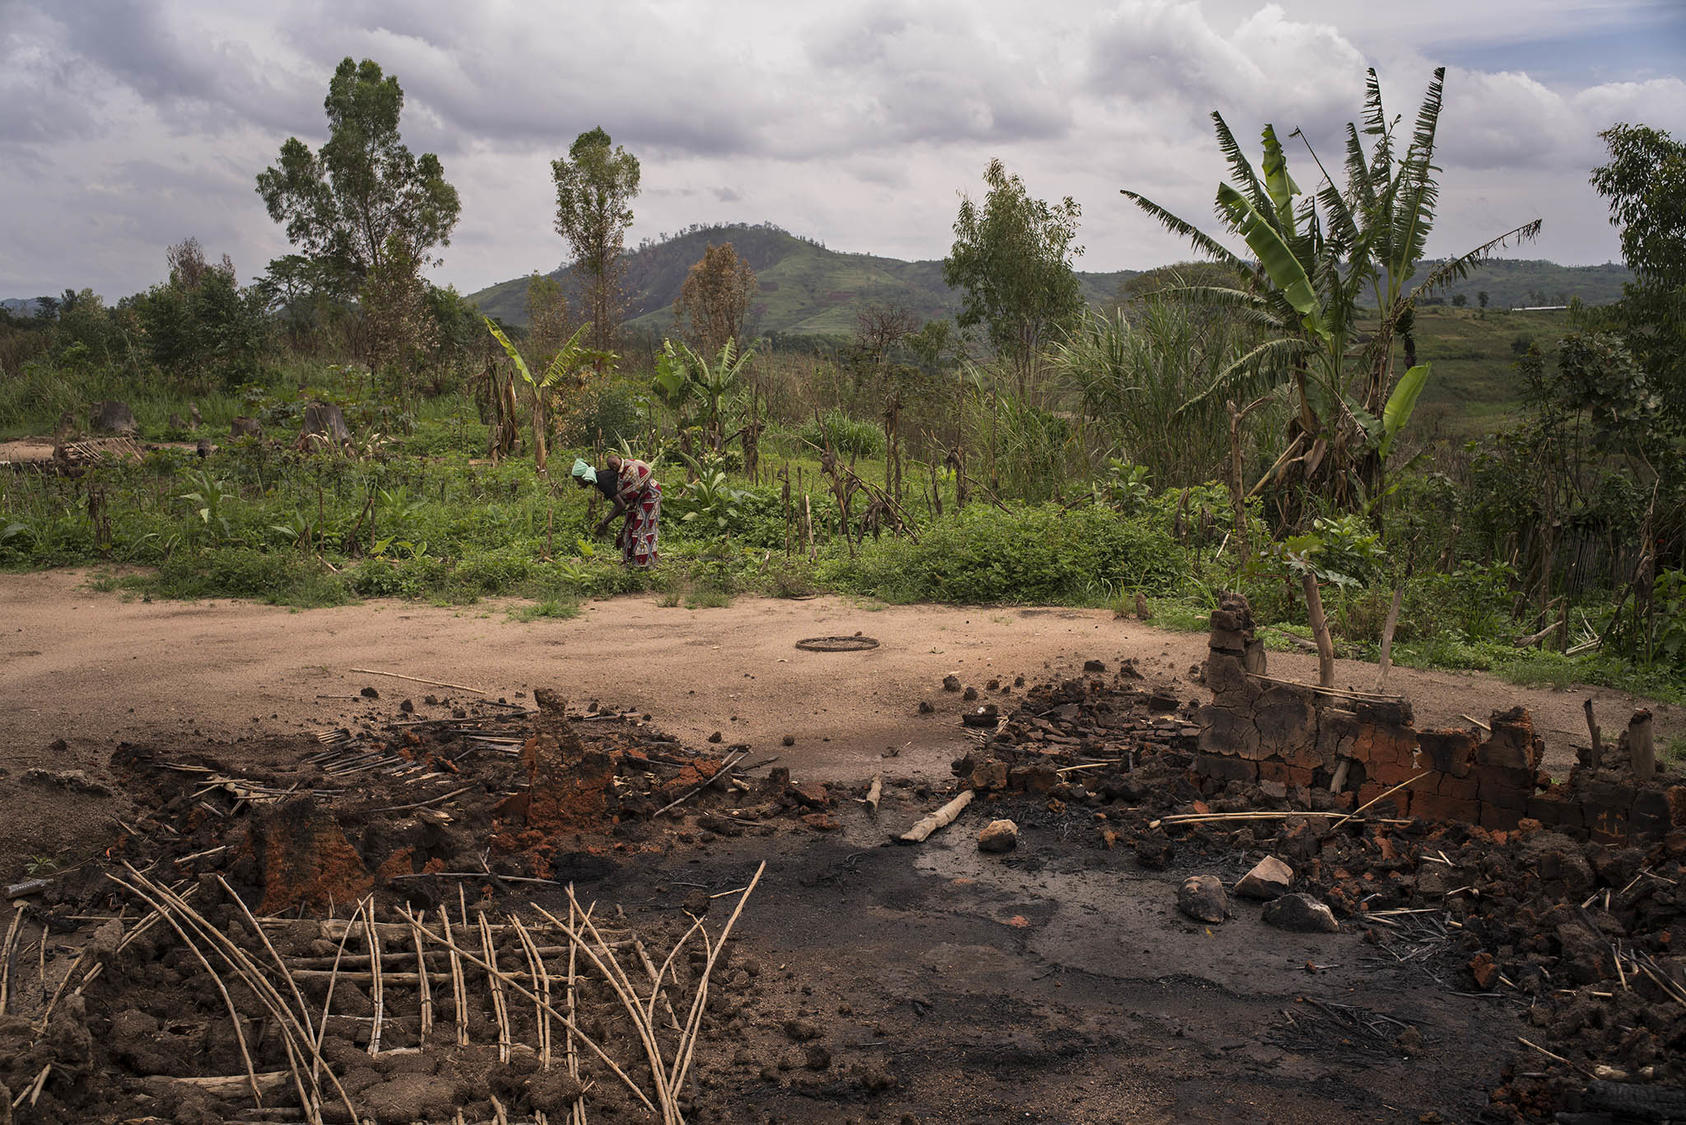 A woman salvages crops beside ruins of her home, burned in a 2018 surge of the conflicts in eastern Democratic Republic of Congo. Decades of warfare complicates environmental protection in the region. (Diana Zeyneb Alhindawi/The New York Times)